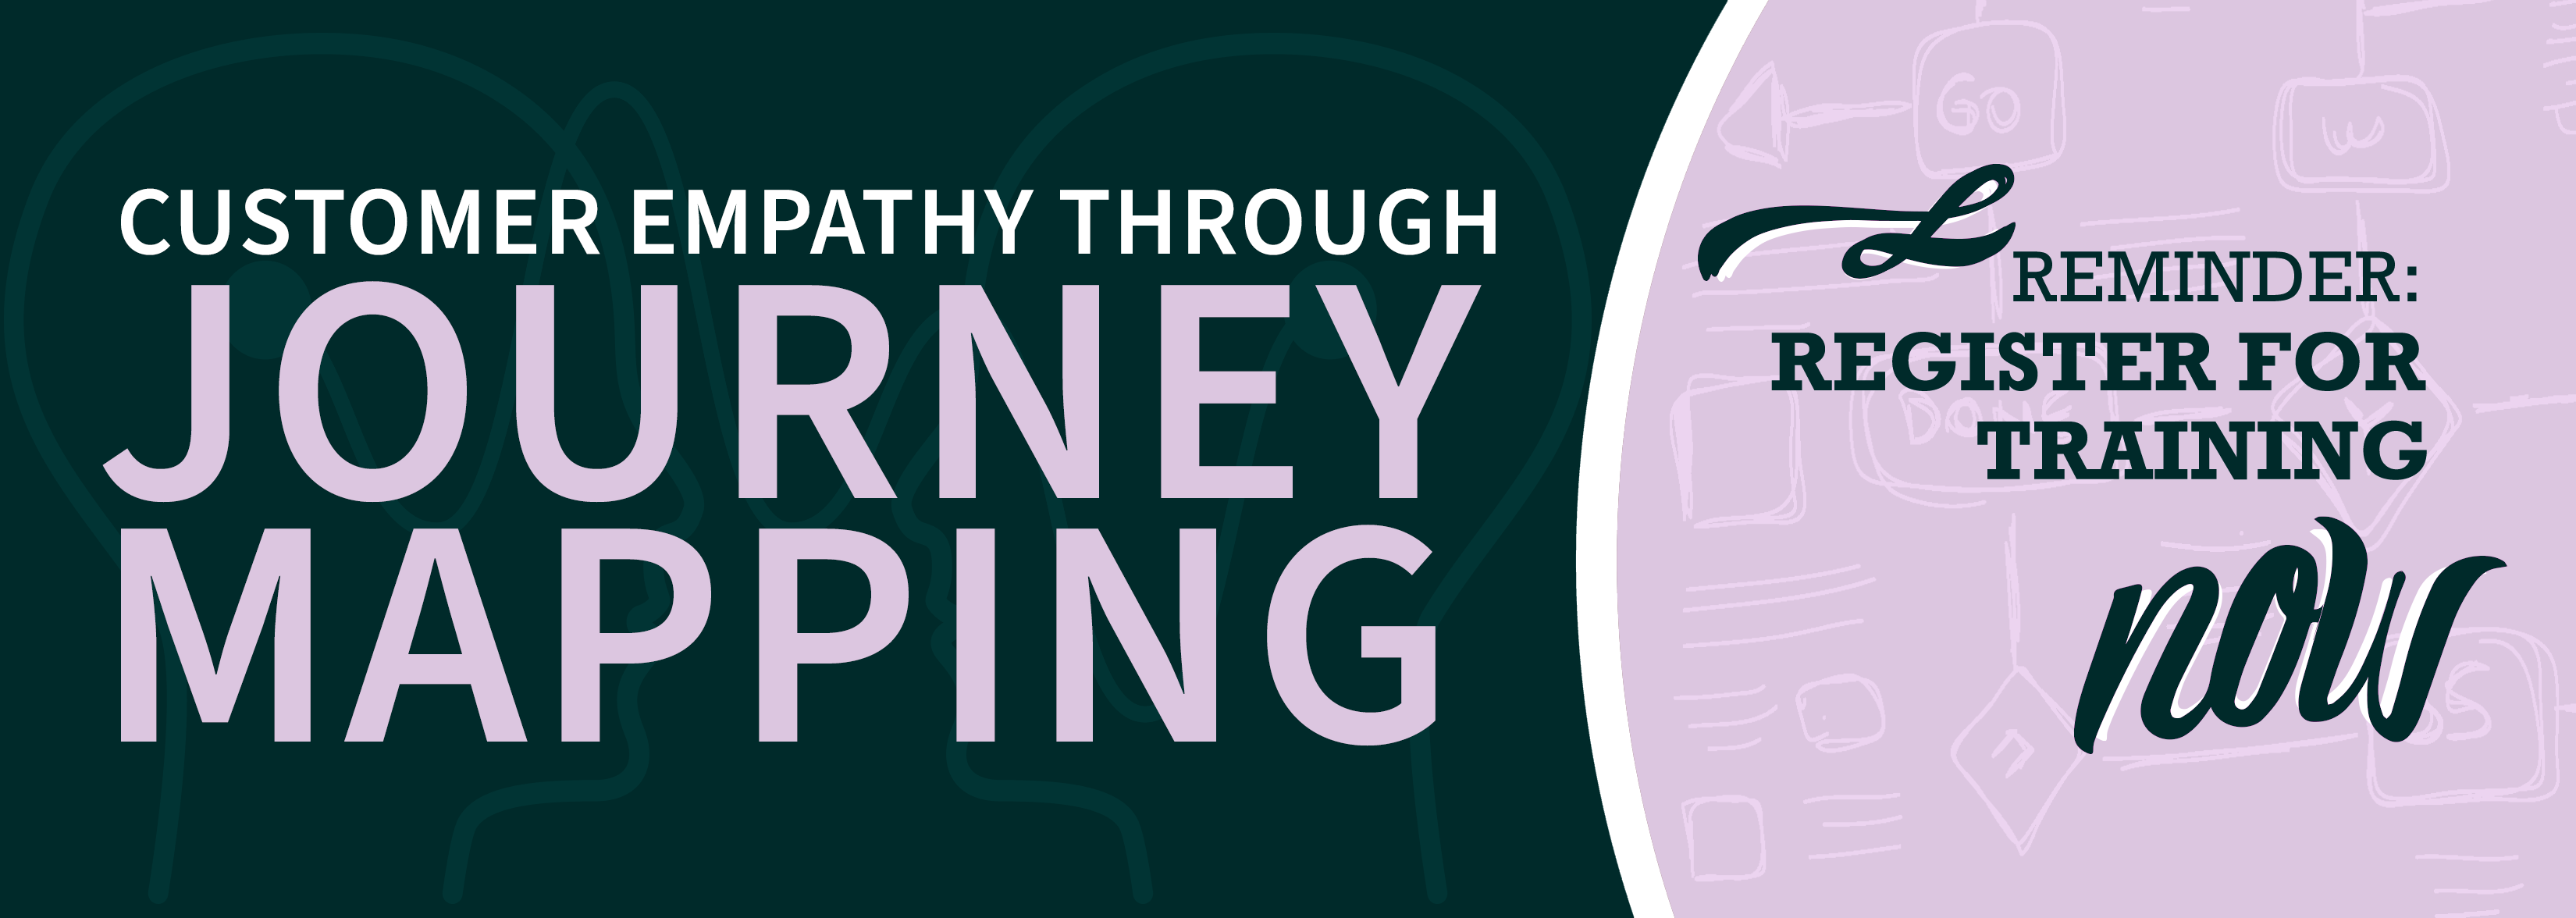 Customer Empathy Through Journey Mapping - Reminder to Register for Training Now